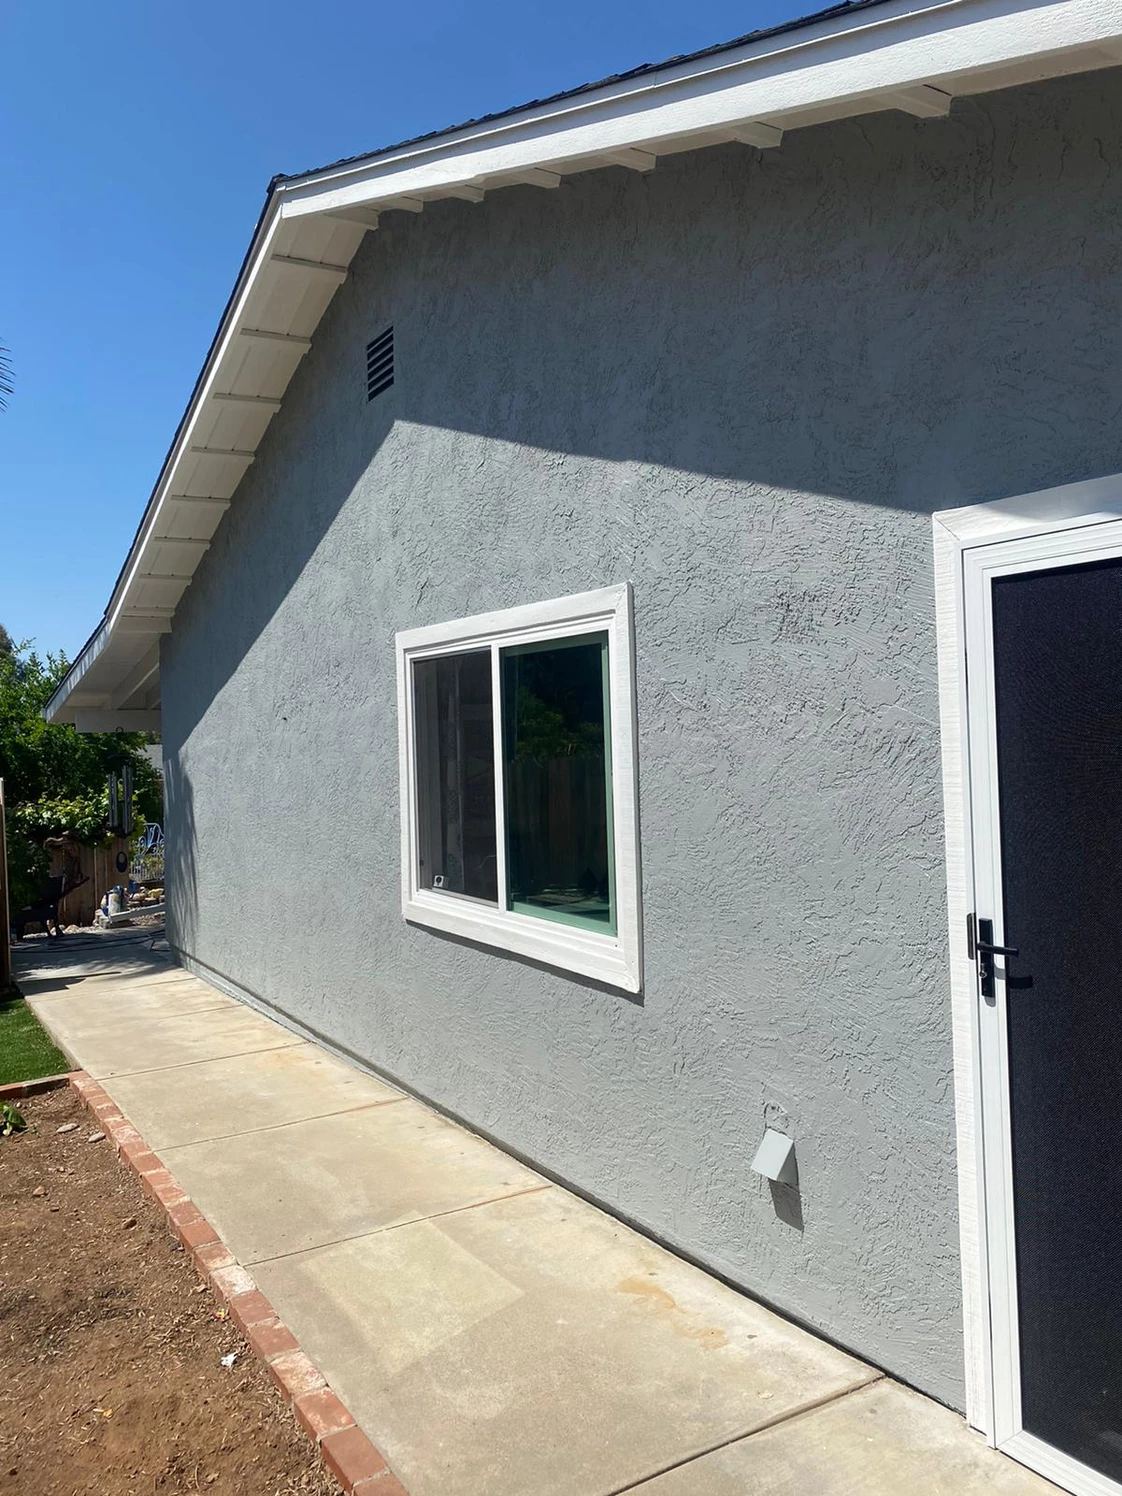 House Painting in Ramona 92065 (1)